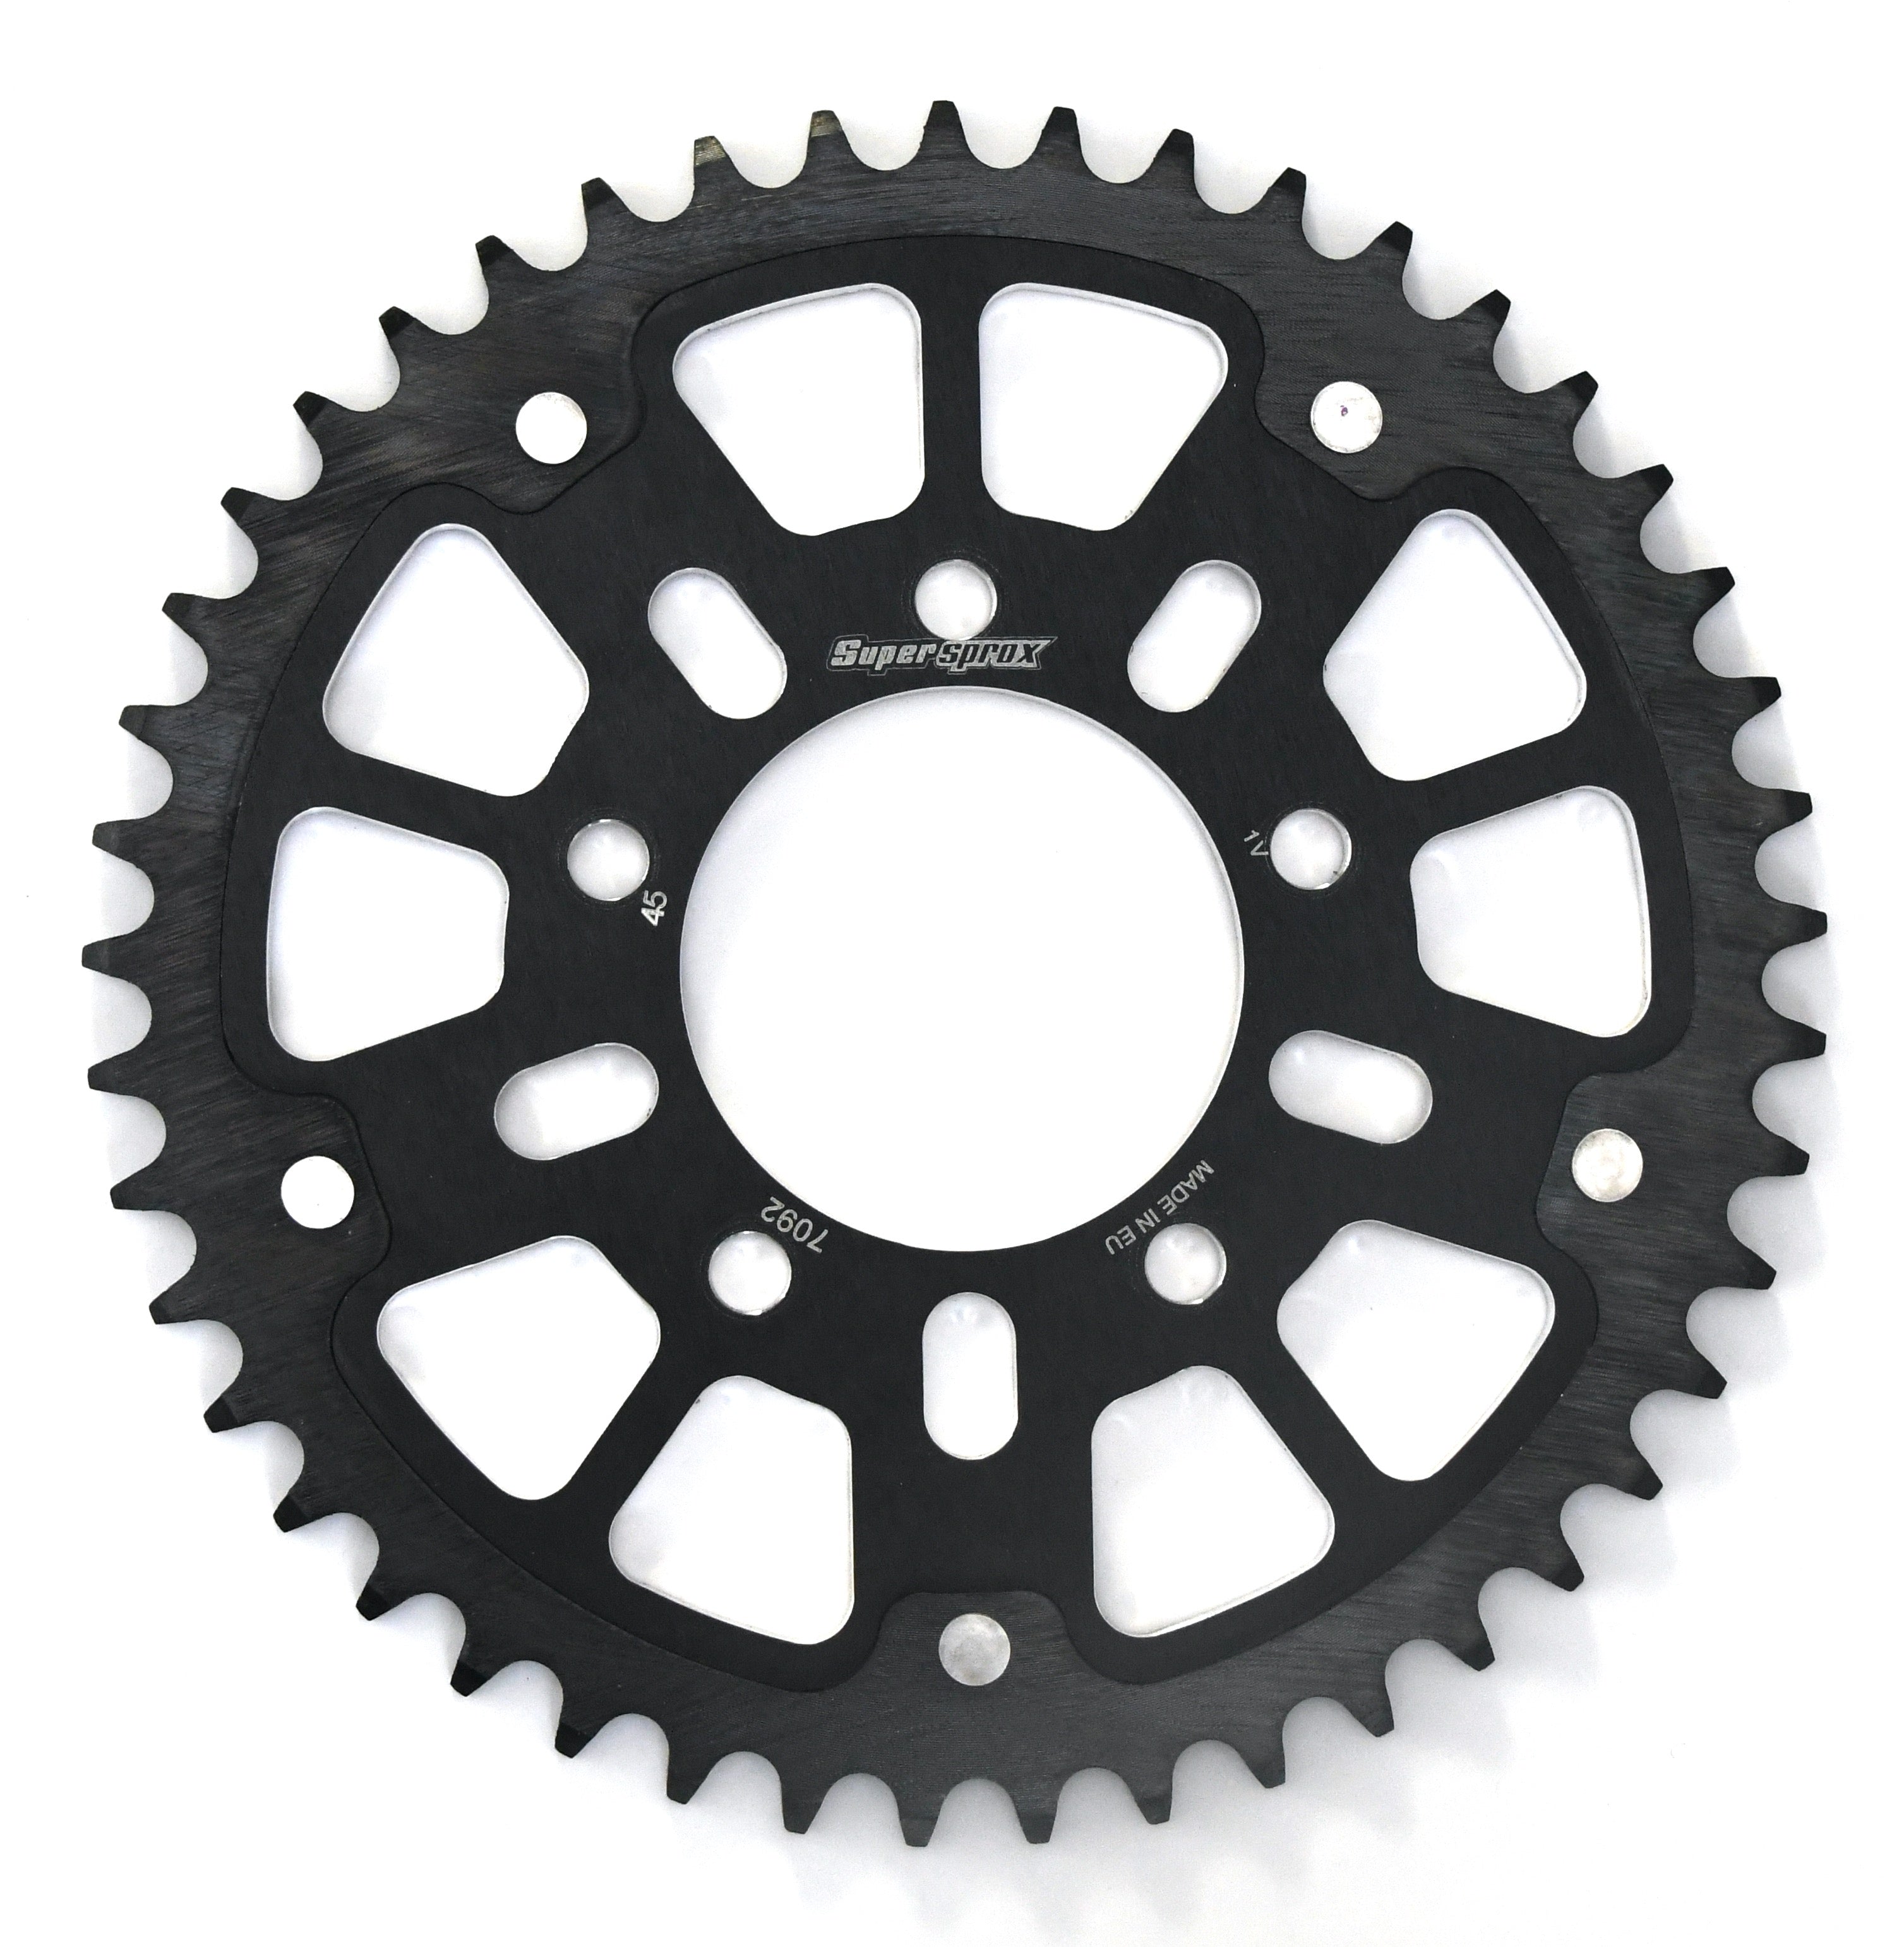 Supersprox Stealth 525 Pitch Rear Sprocket RST-7092:45 - (525, 76mm Centre, 100mm PCD)